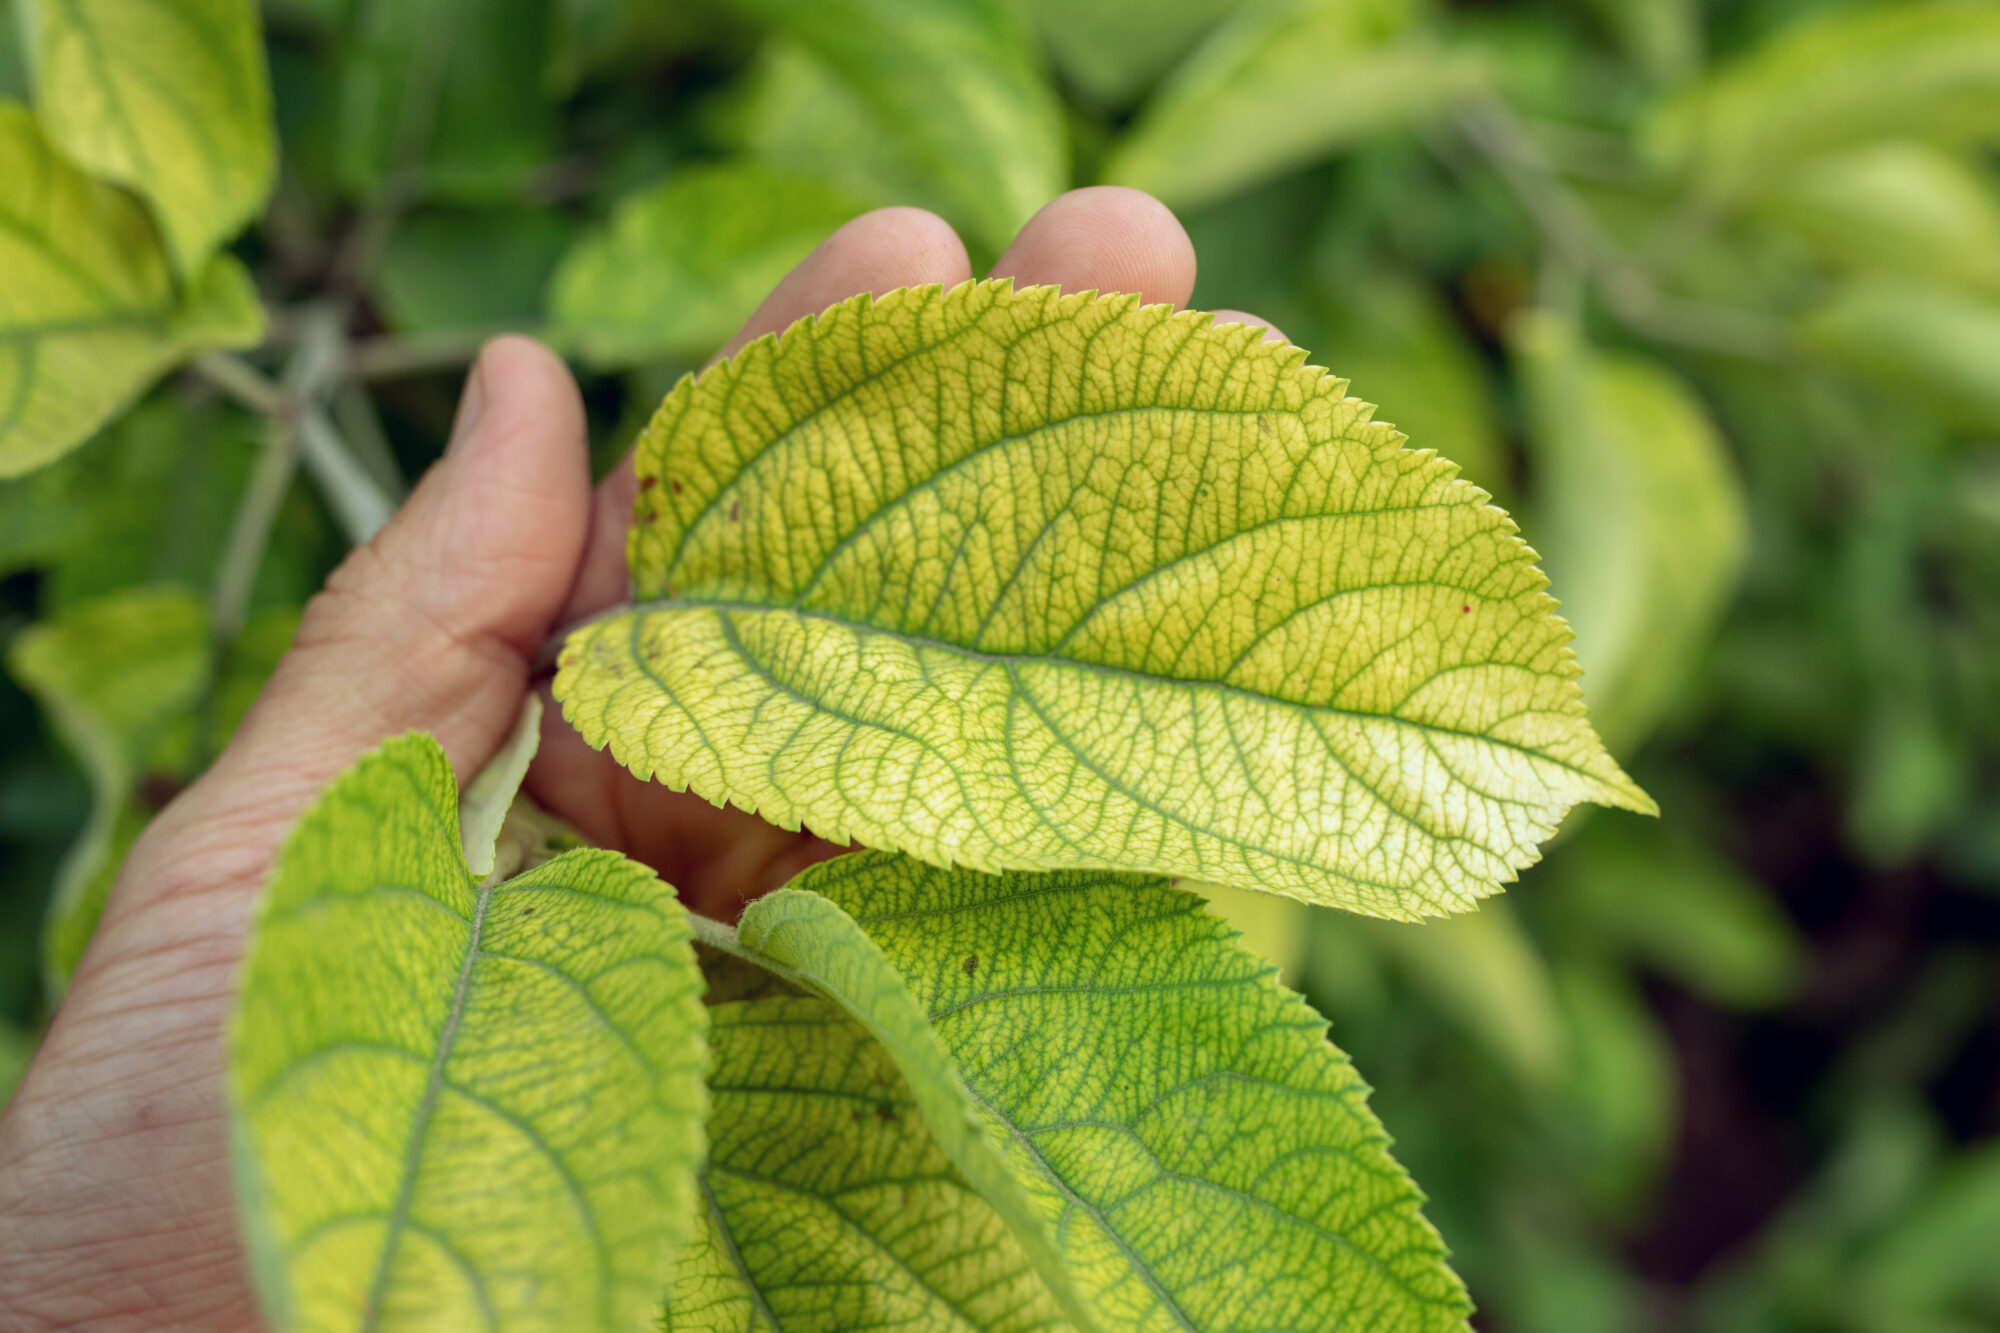 A hand holding a leaf showing signs of chlorosis with prominent yellowing between the veins.





